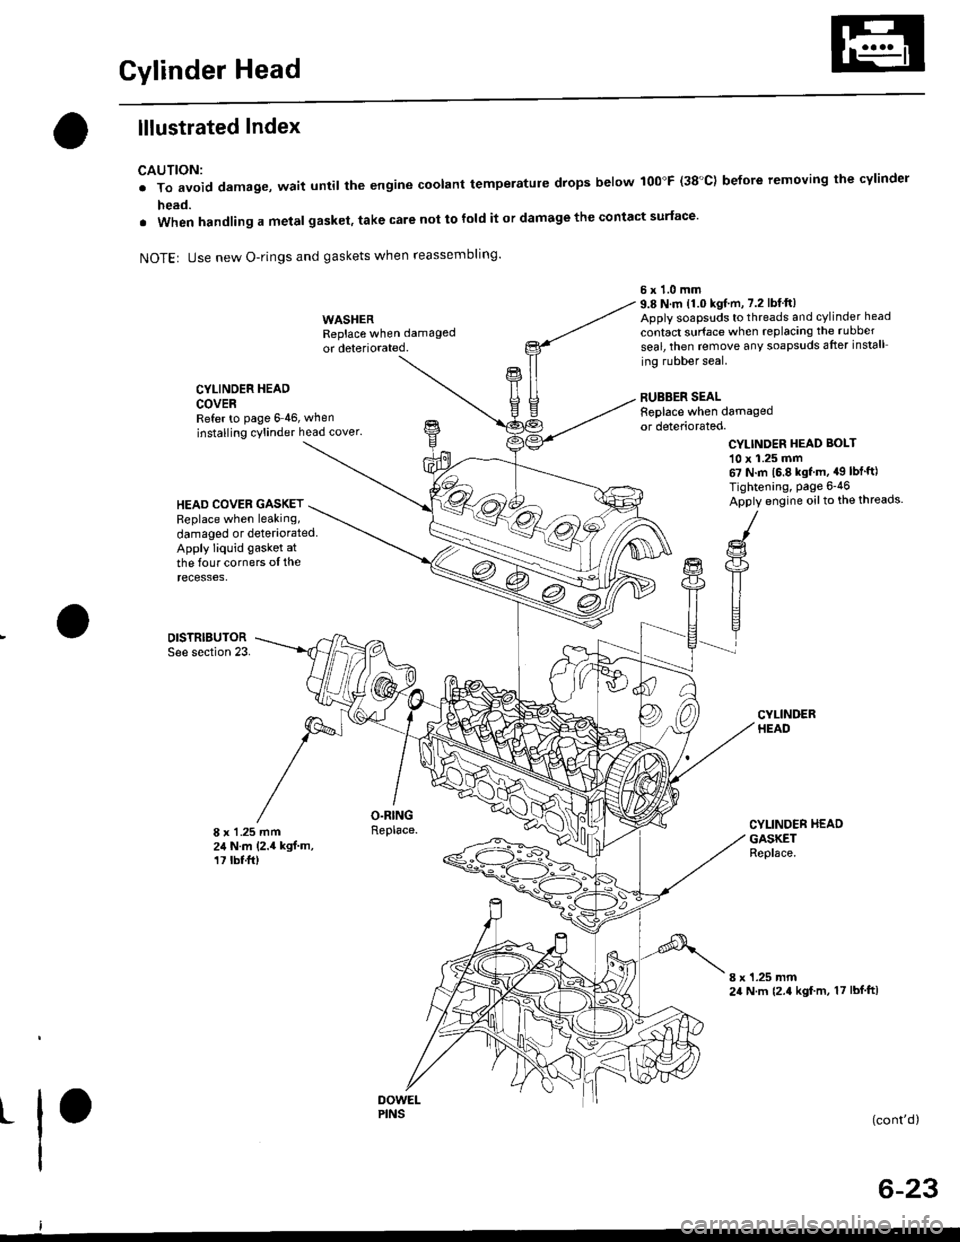 HONDA CIVIC 1996 6.G User Guide Gylinder Head
lllustrated Index
CAUTION:
. To avoid damage, wait until the engine coolant temperatule drops below 100"F (38C) before removing the cylinder
head.
. When handling a metal gasket, take c